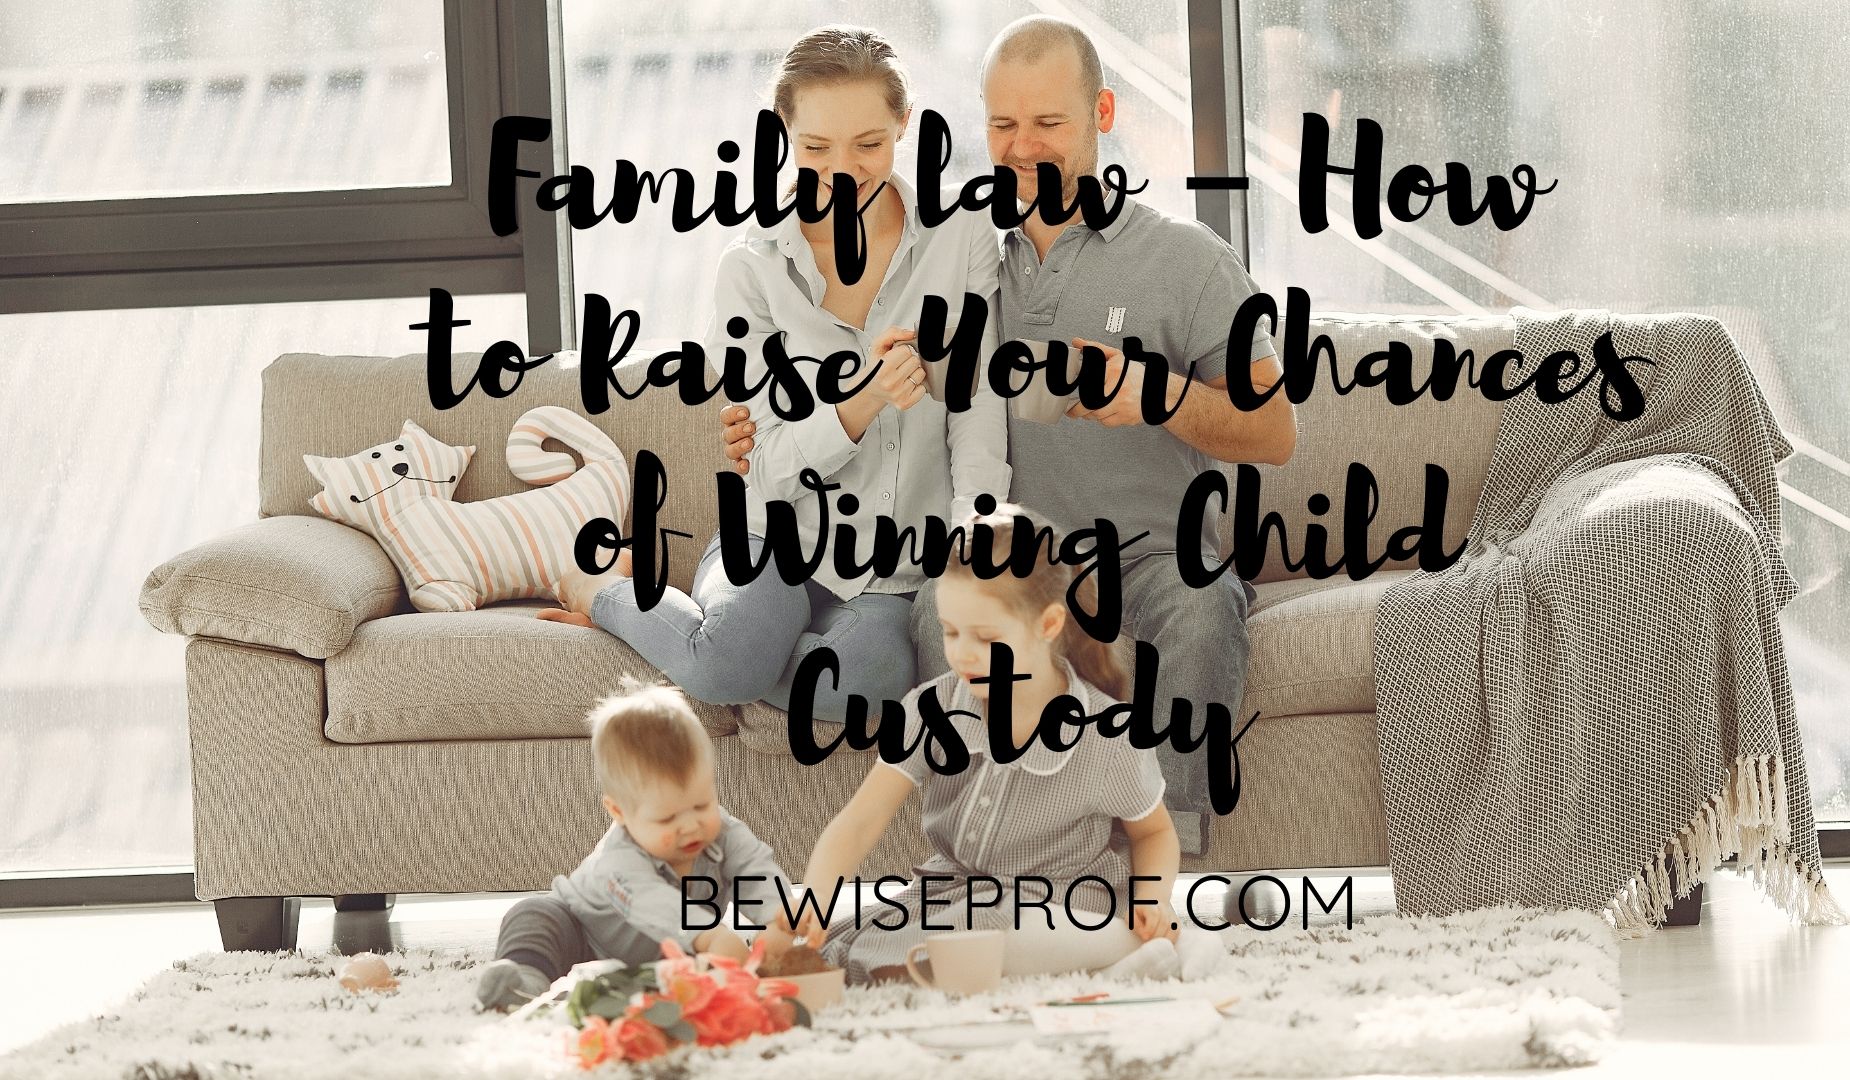 Family law – How to Raise Your Chances of Winning Child Custody